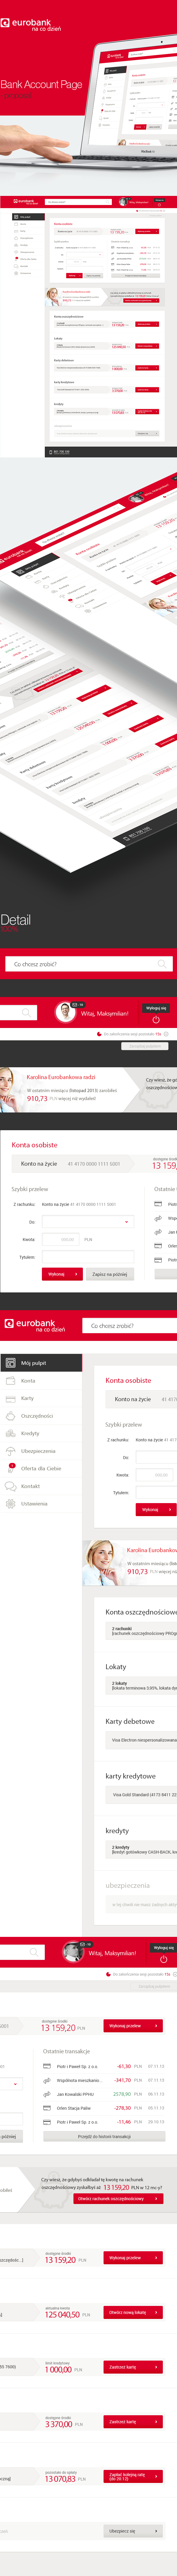 Bank Account Page Bank account page eurobank poland TouchDesign touchdesign.pl